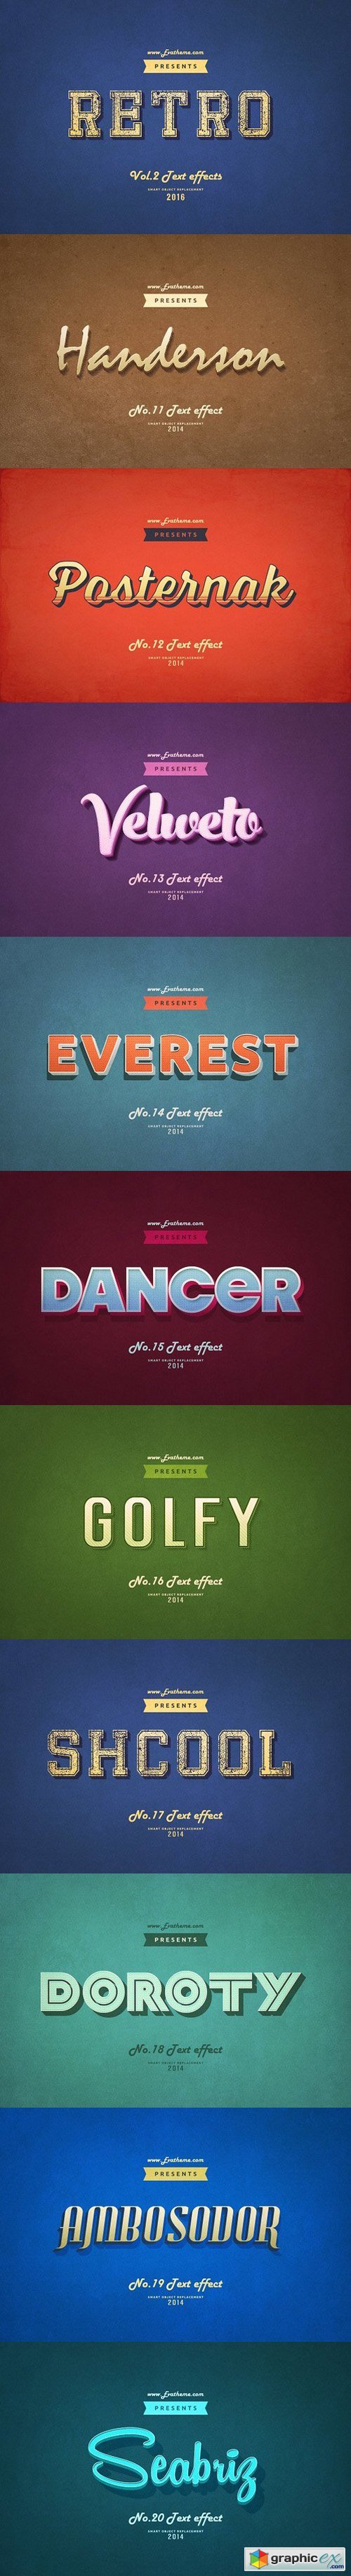 Retro Style Text Effects Vol.2